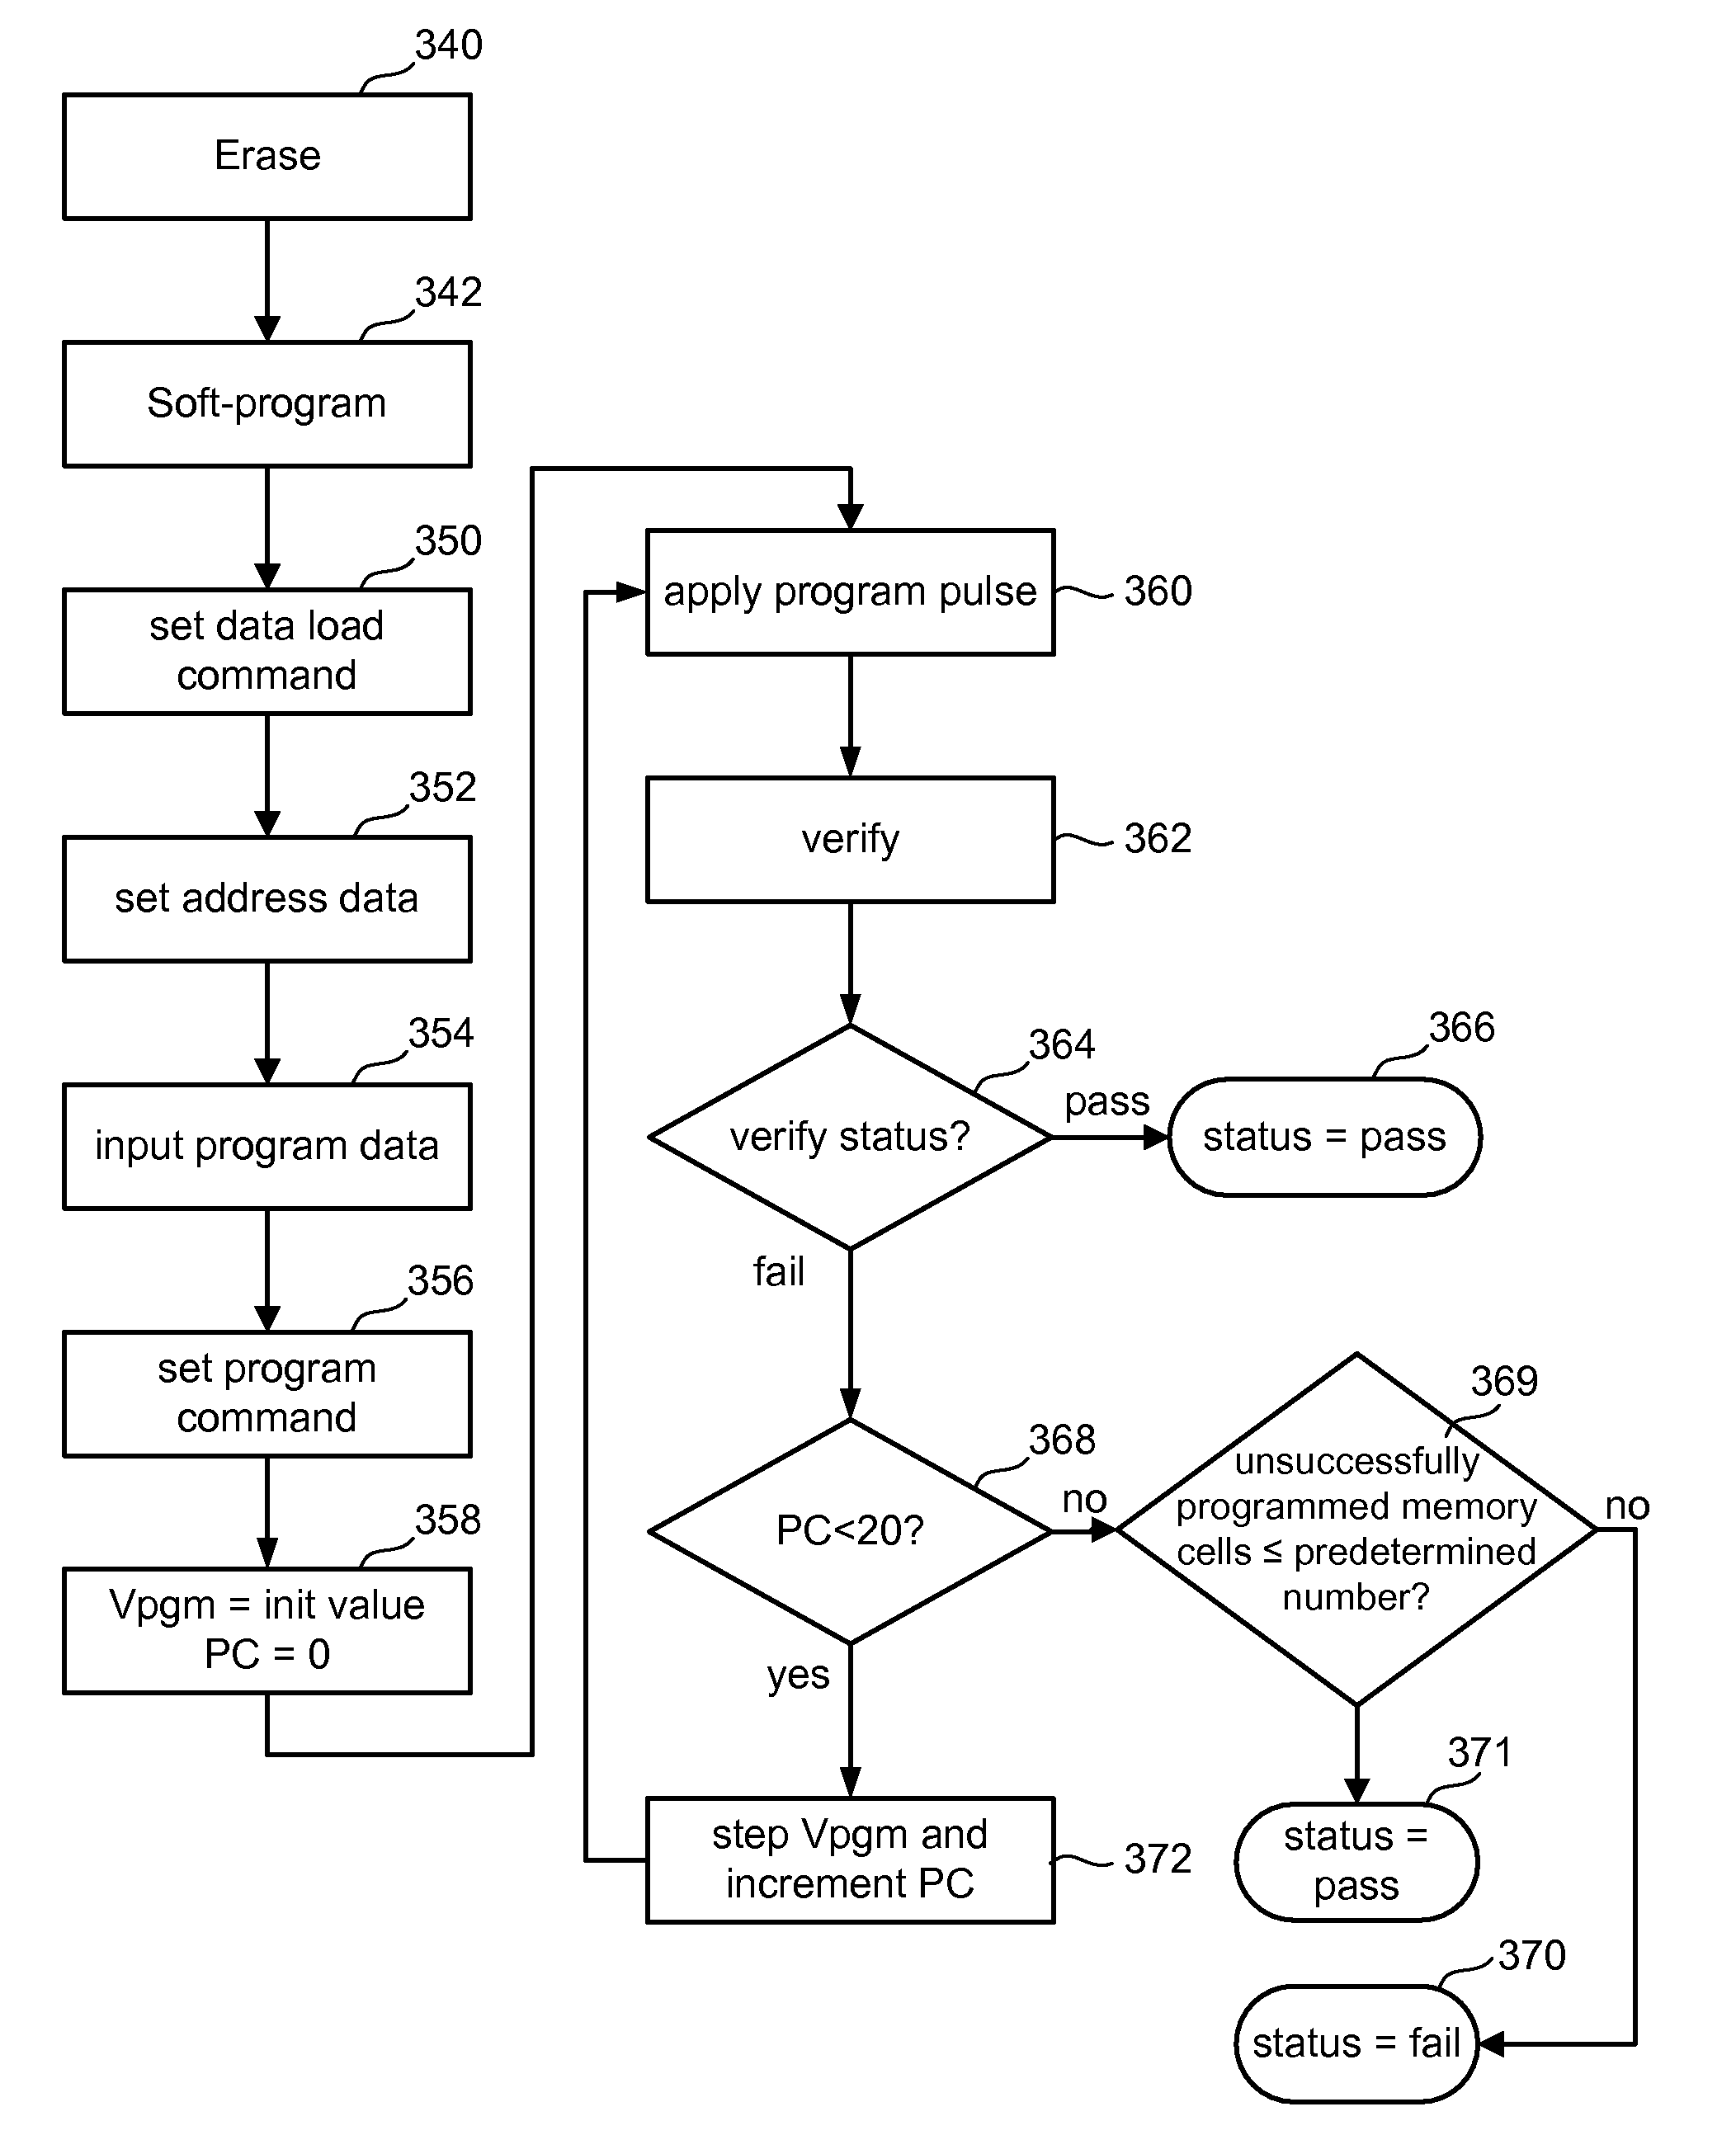 Systems For Erasing Non-Volatile Memory Using Individual Verification And Additional Erasing of Subsets of Memory Cells